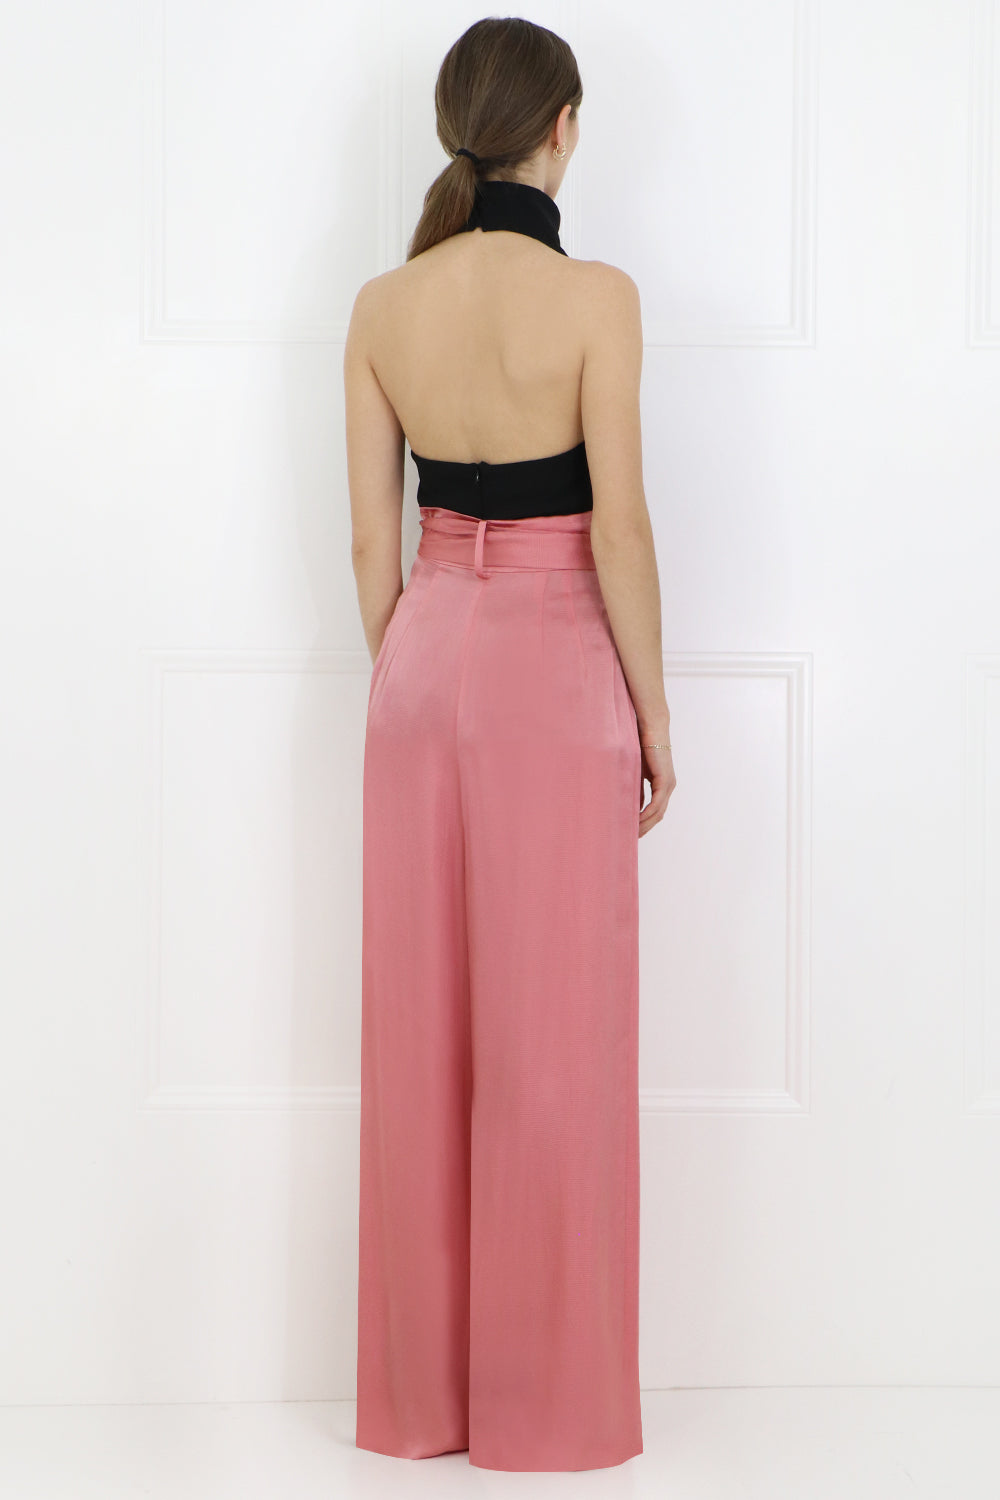 MOTHER OF PEARL PANTS IONA WIDE LEG PANTS WITH BELT PINK